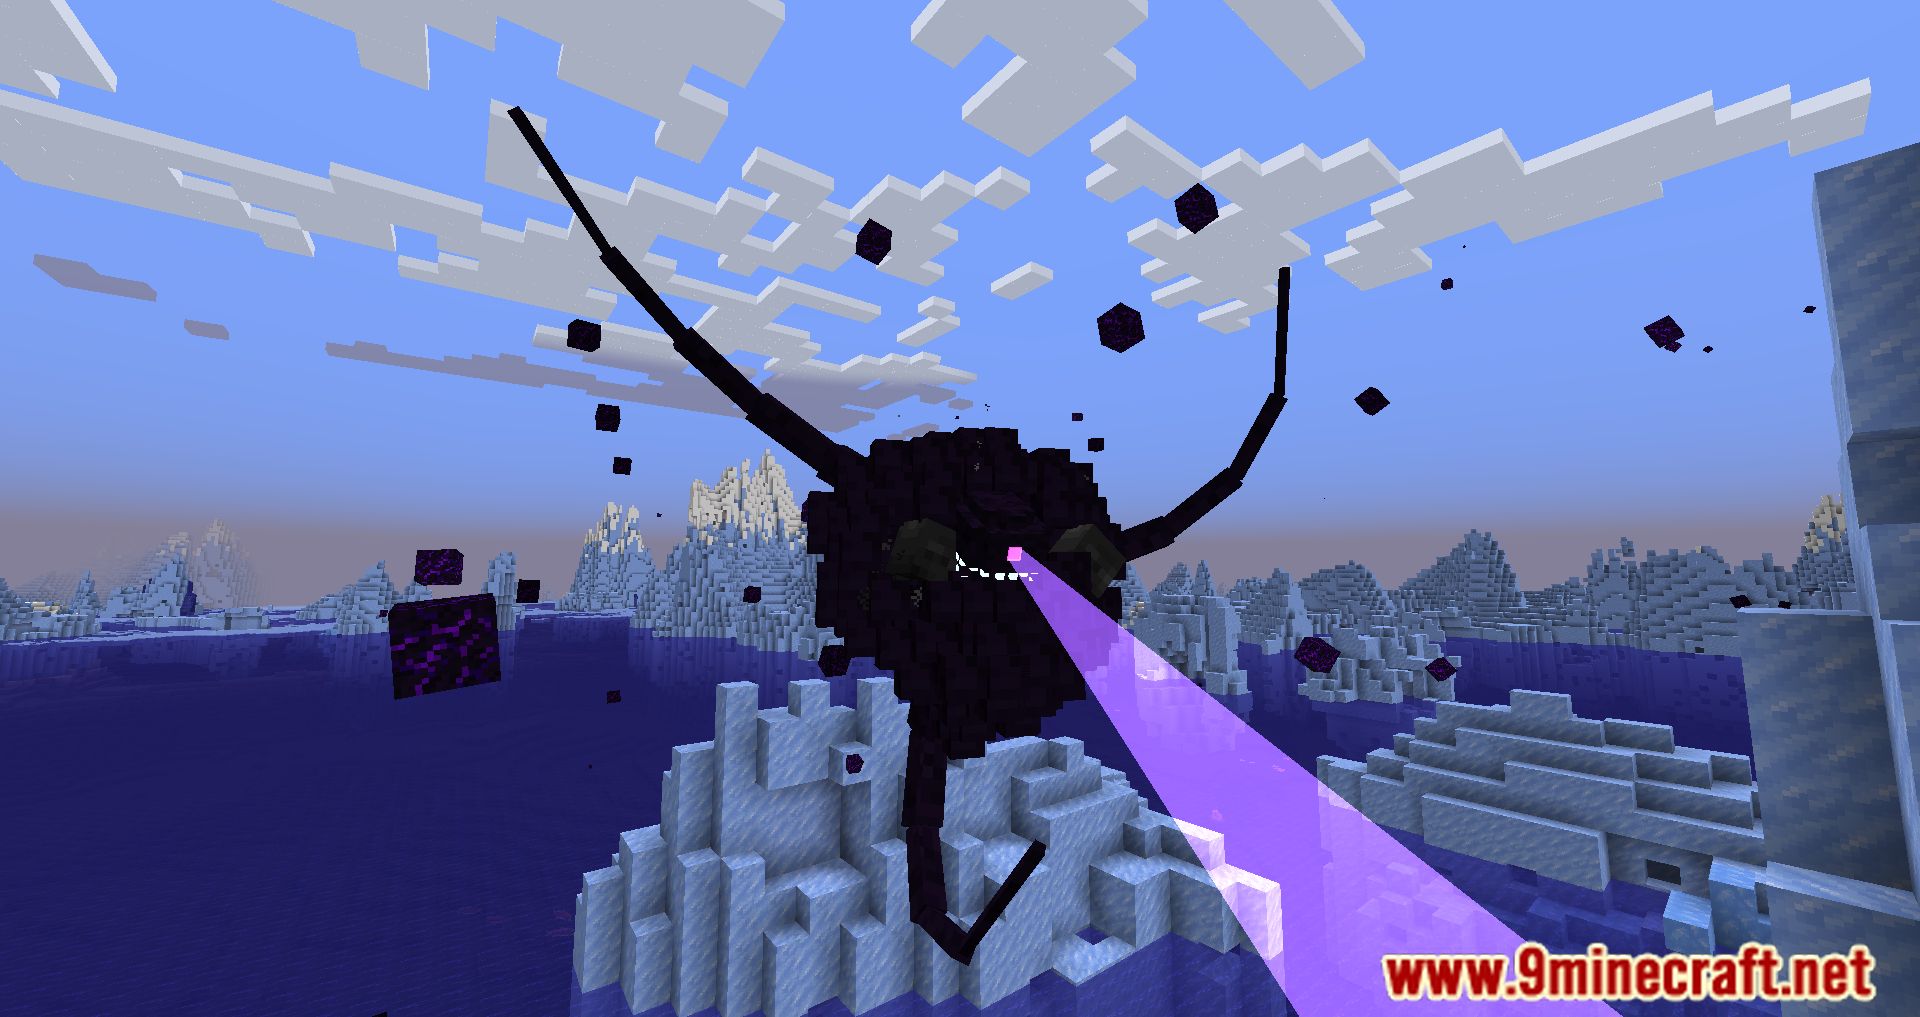 When i kill the Wither Storm, the Torso instantly disappears · Issue #952 ·  nonamecrackers2/crackers-wither-storm-mod · GitHub